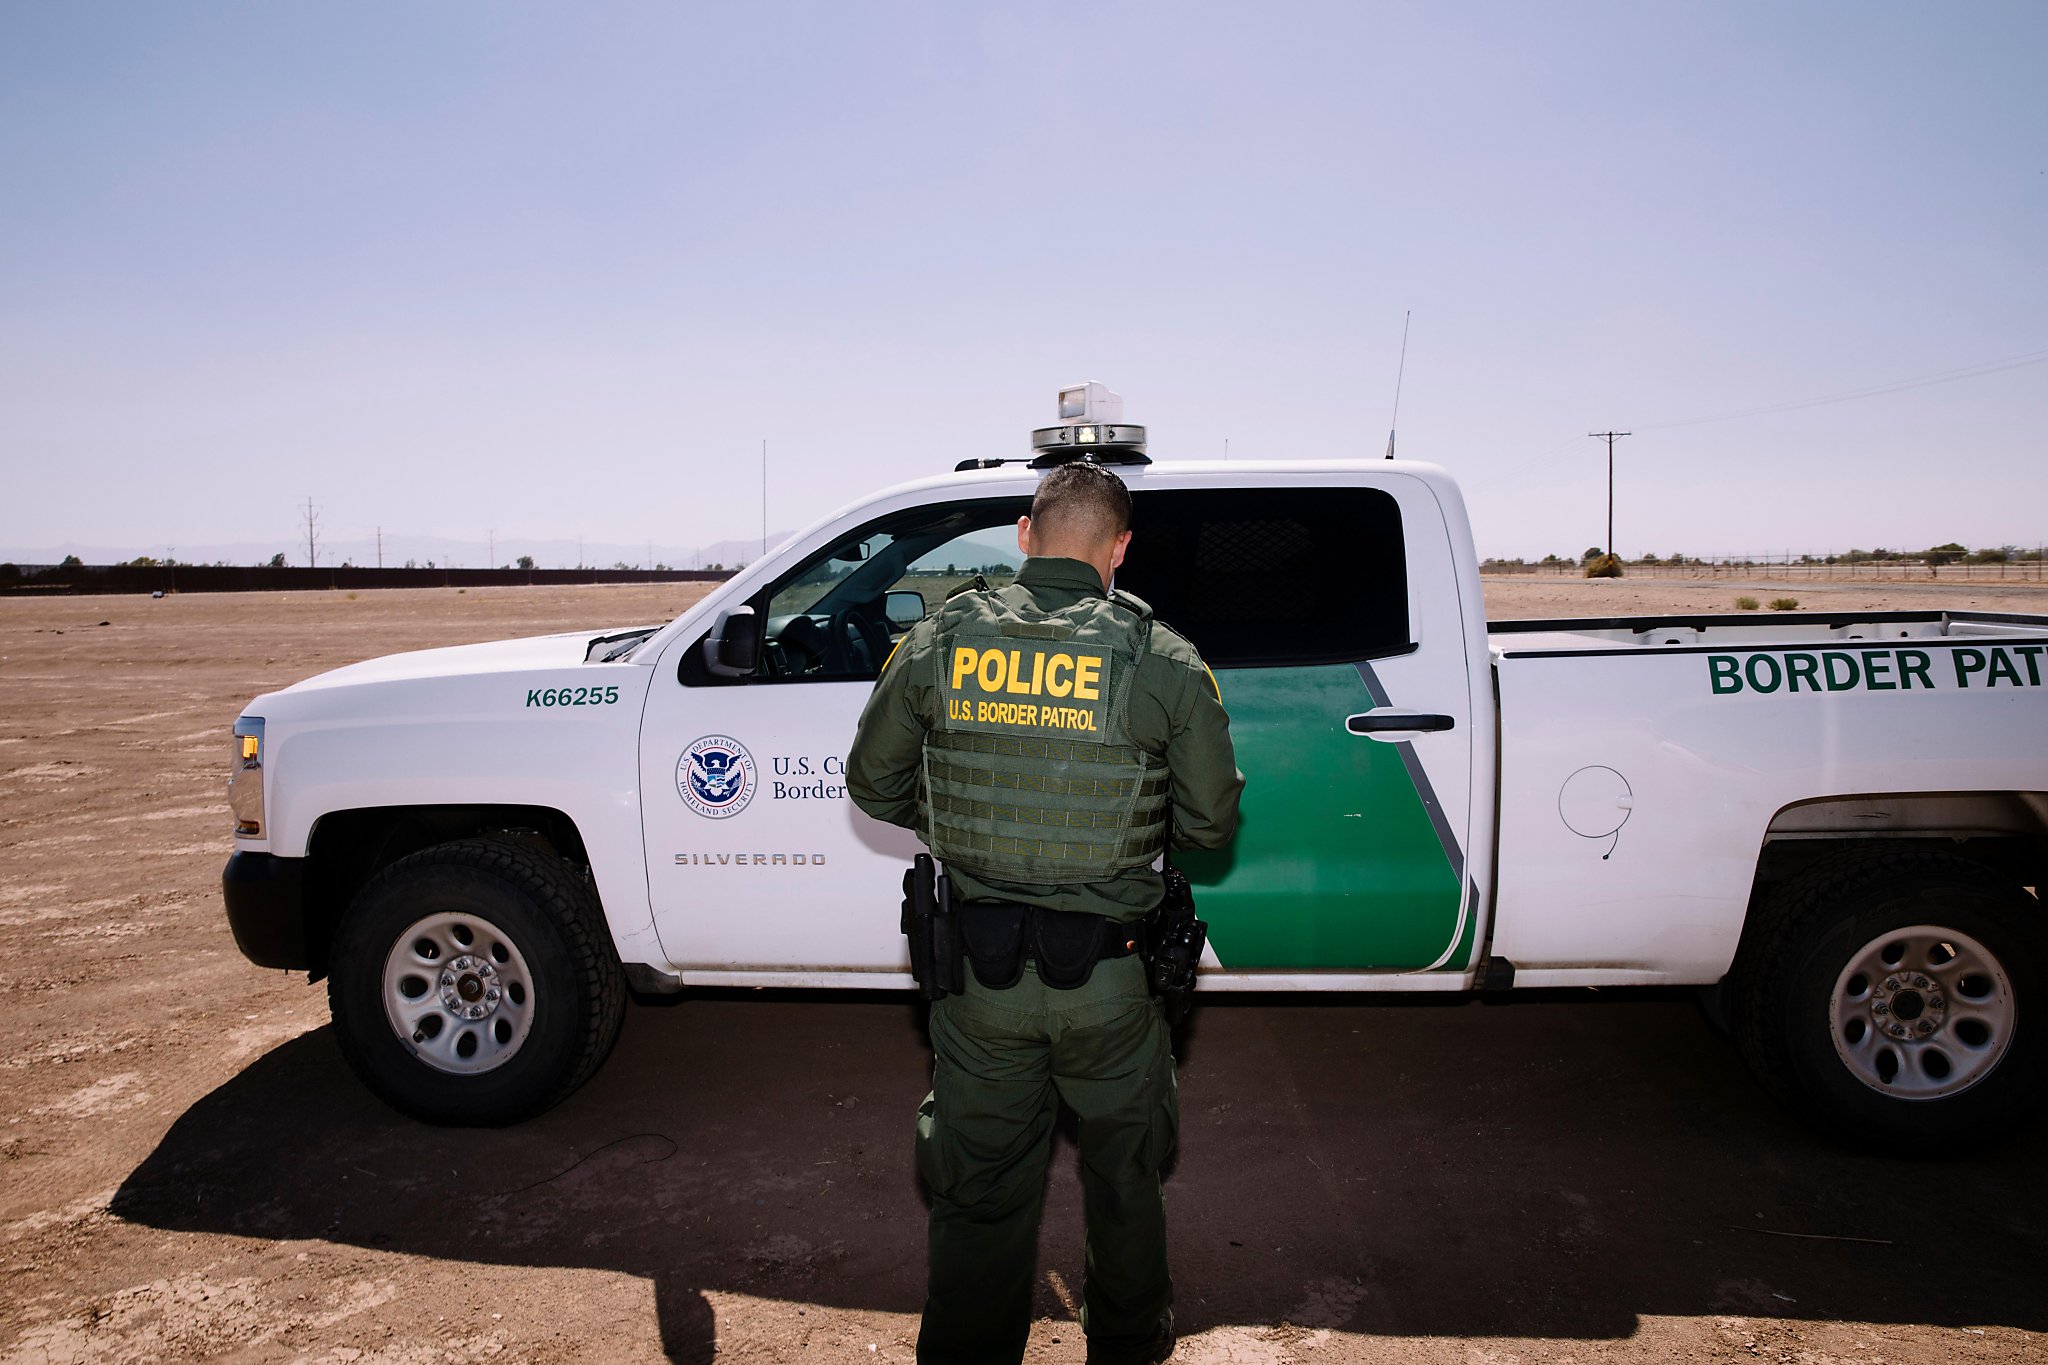 Border Patrol will assist ICE in immigration crackdown in sanctuary cities.